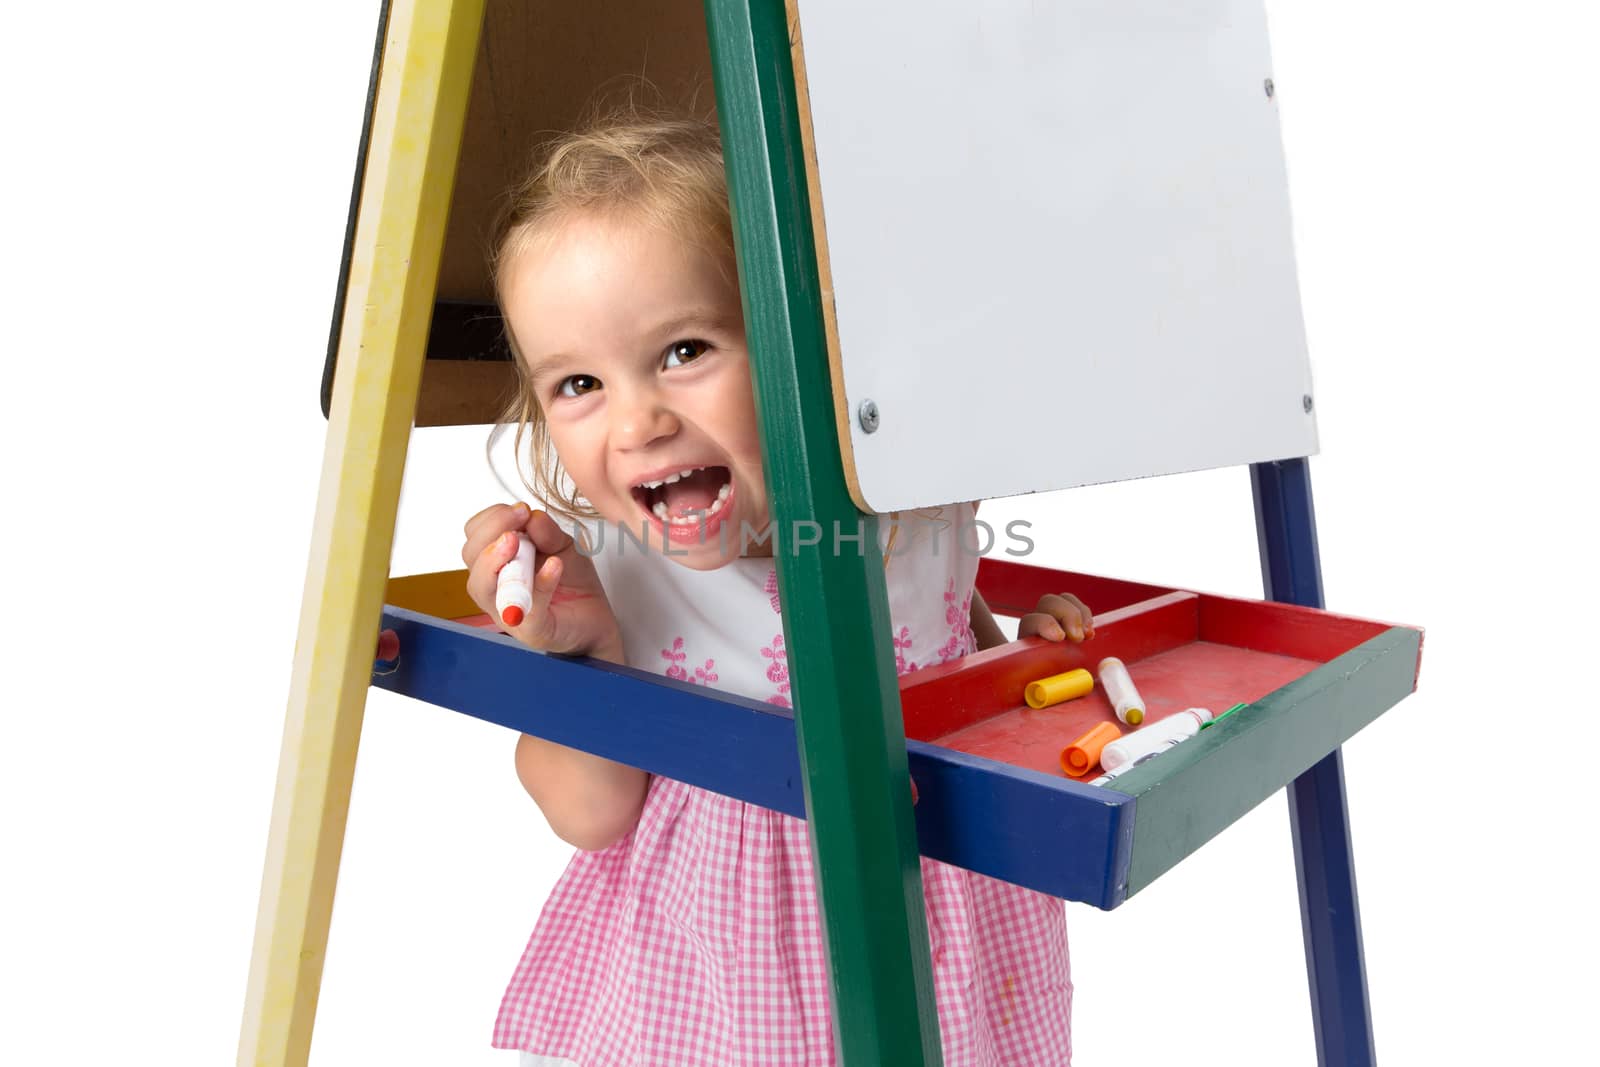 Girl smiling between whiteboard legs cheerfully and playfully, copy space on the whiteboard